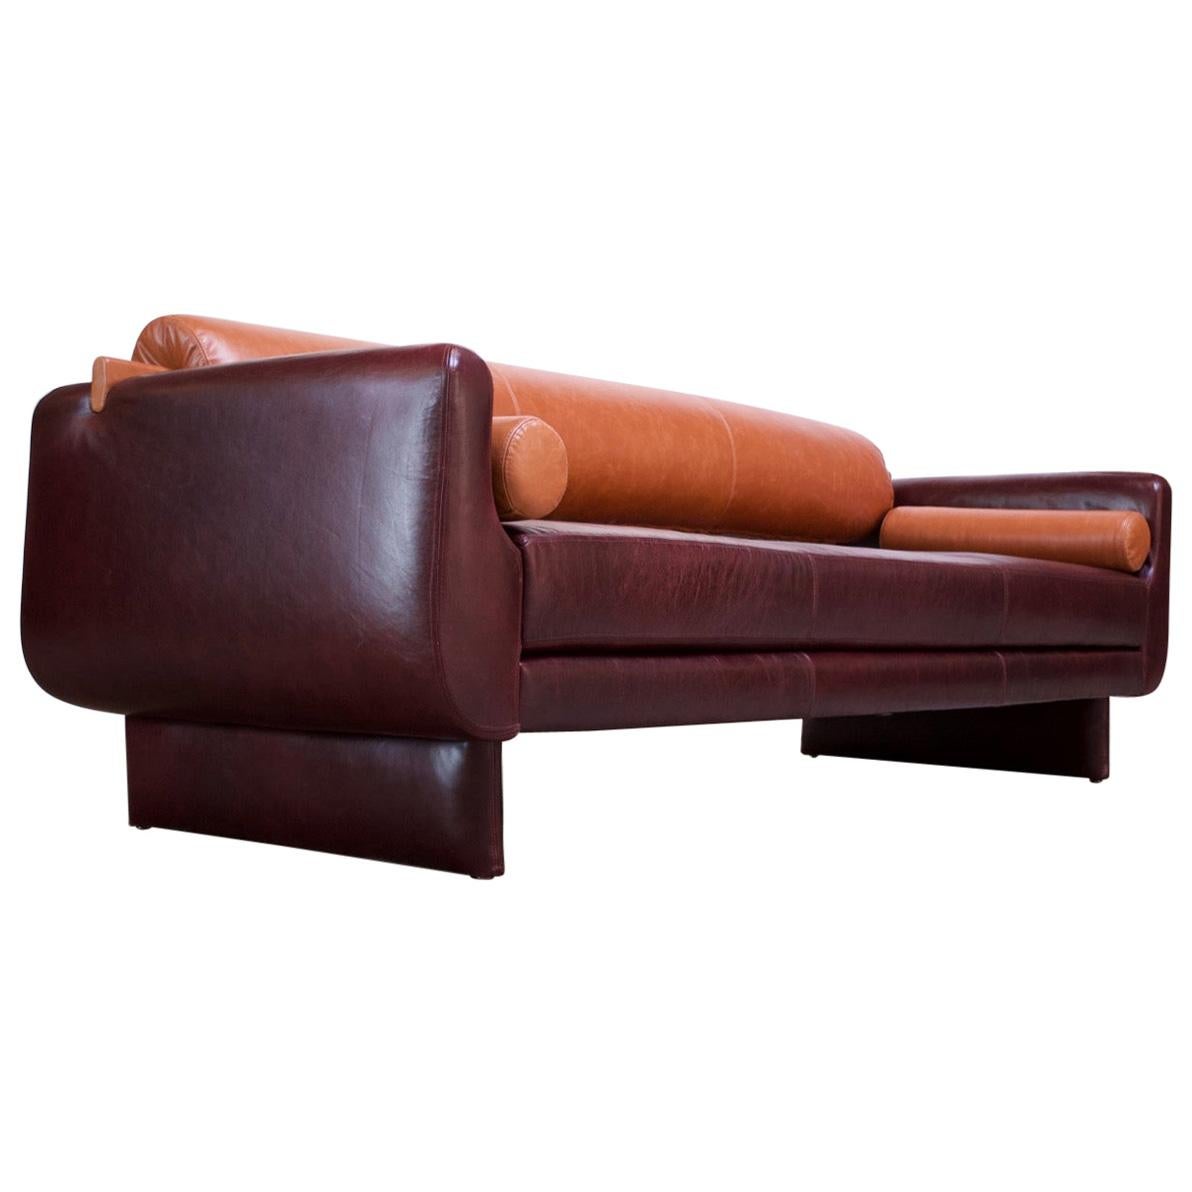 Leather 'Matinee' Sofa / Daybed by Vladimir Kagan